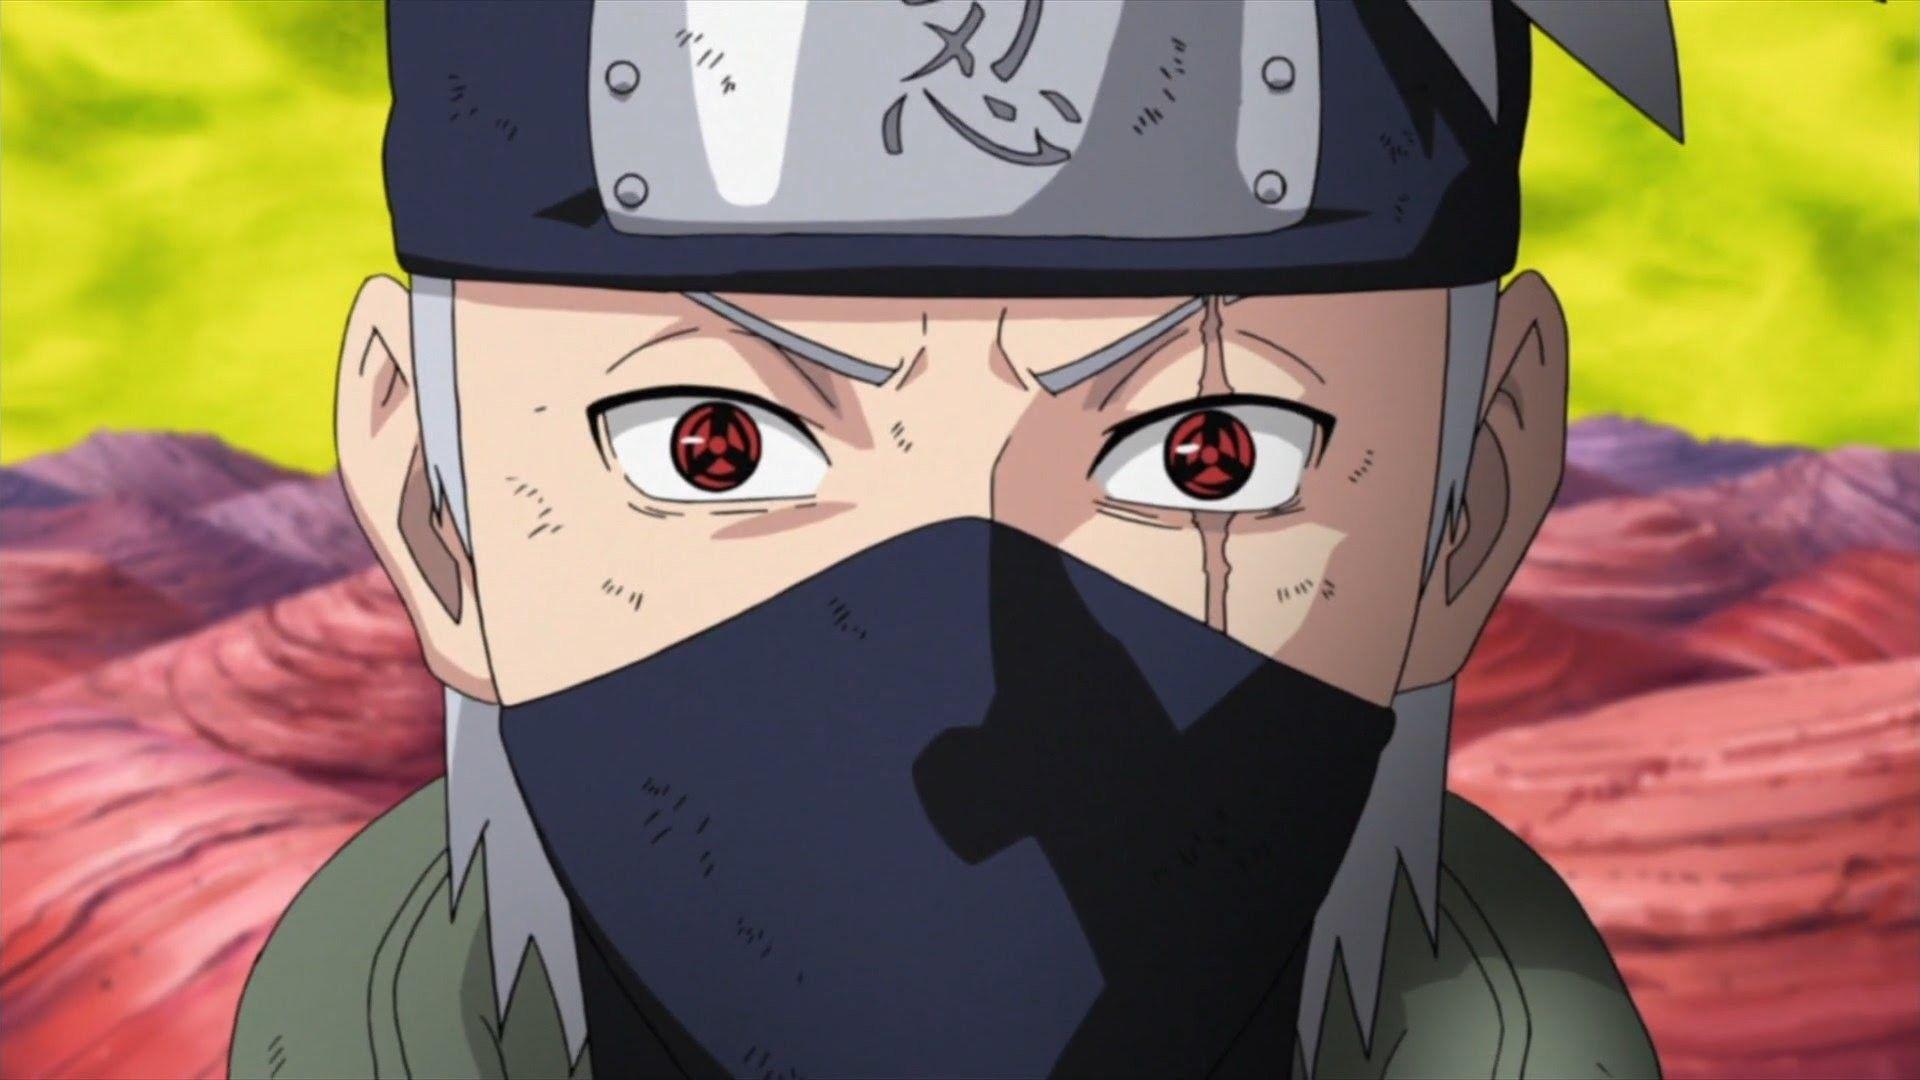 Kakashi Double Sharingan Wallpapers Top Free Kakashi Double Sharingan Backgrounds Wallpaperaccess In this video obito awakening his mangekyo sharingan for first time when he seen rin killed by kakashi. kakashi double sharingan wallpapers